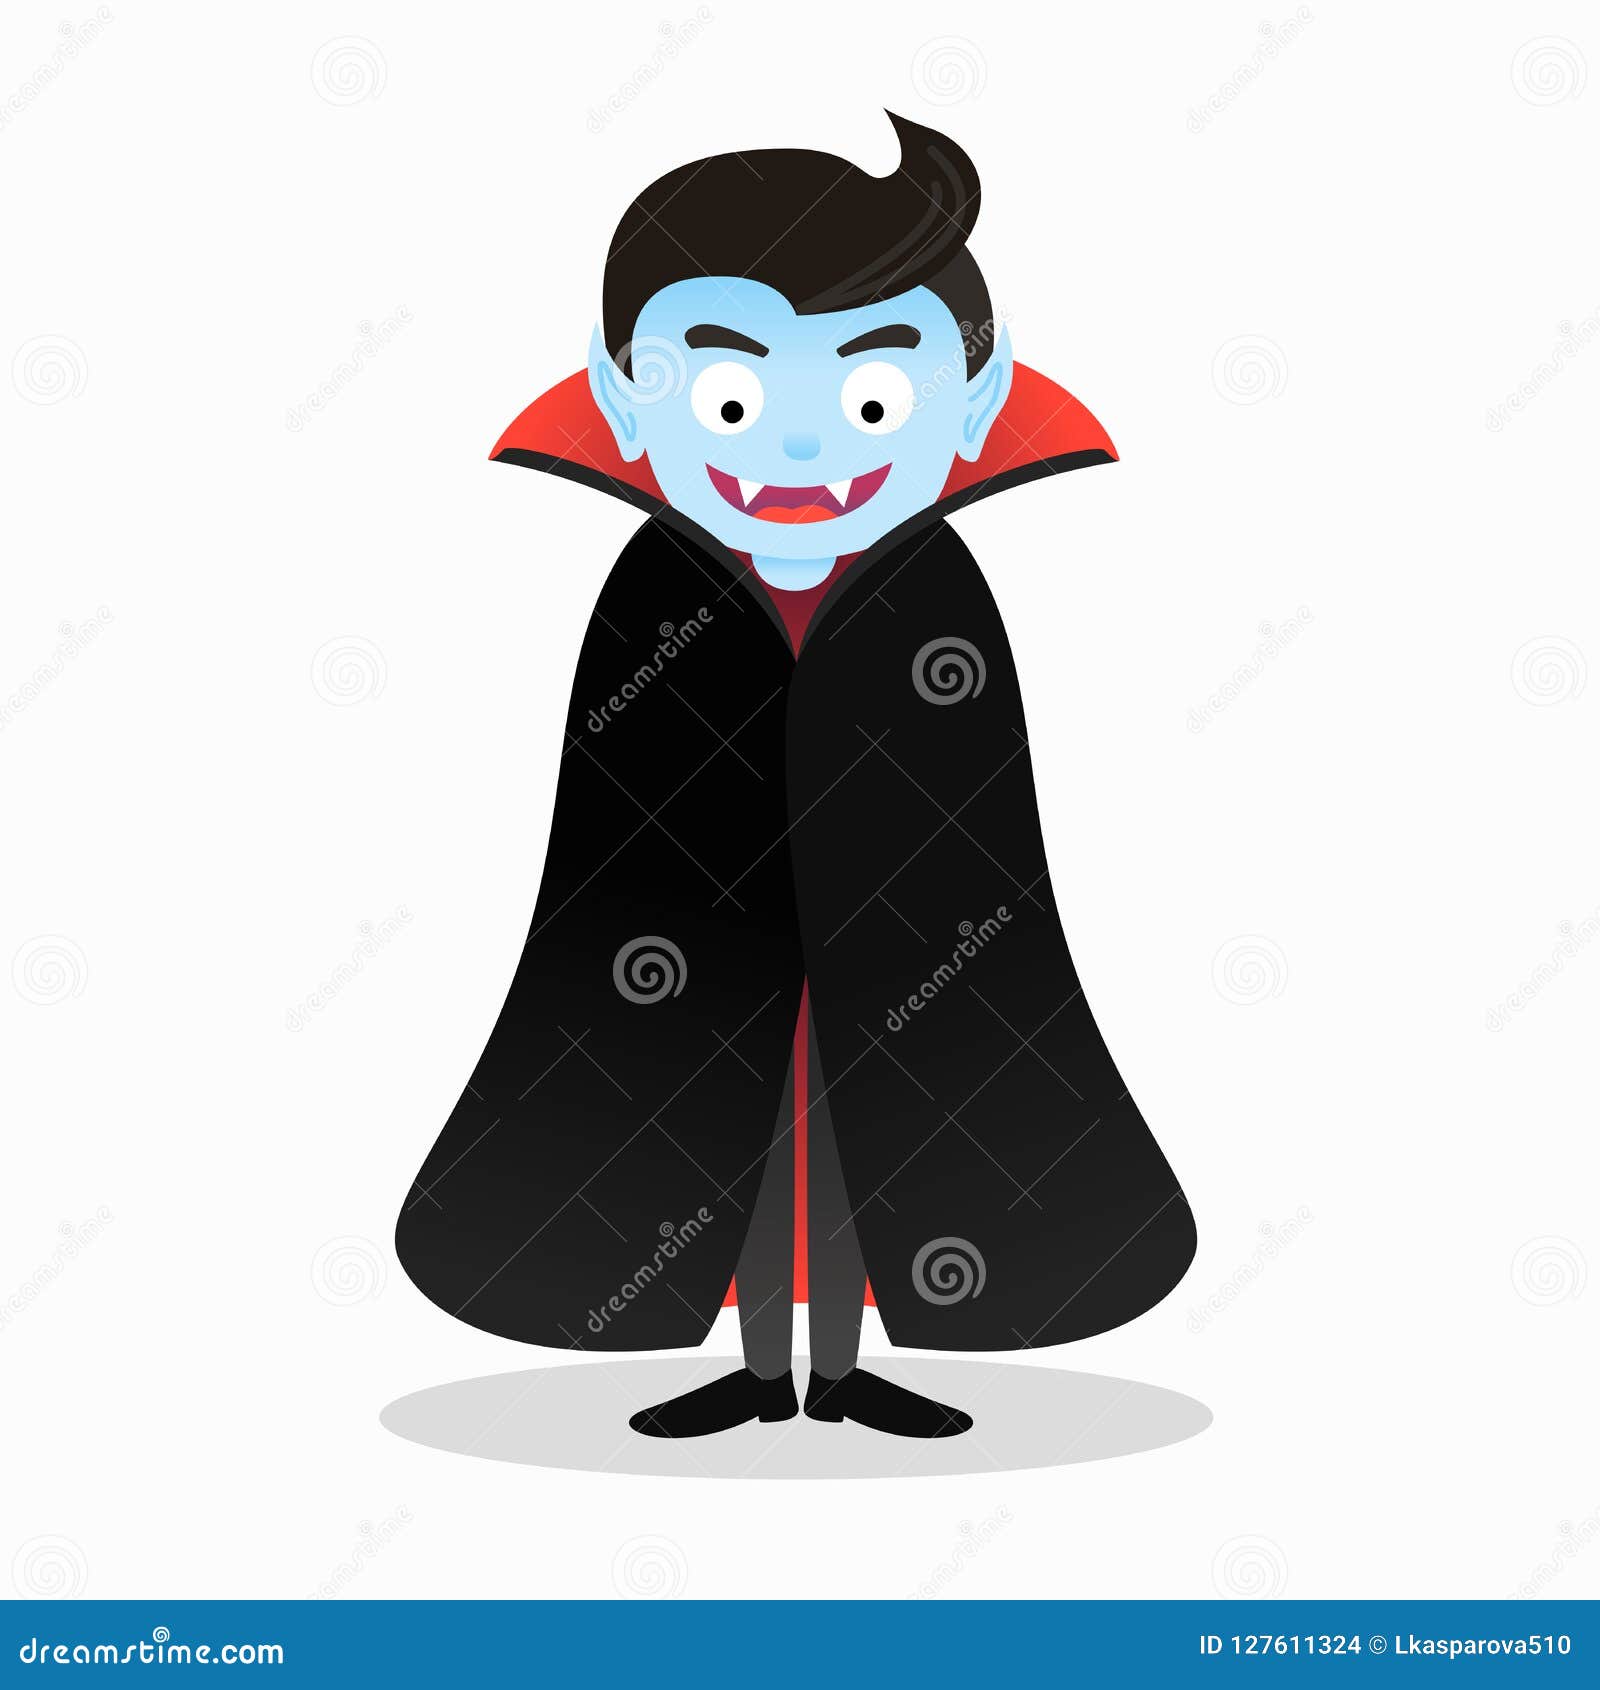 Cartoon Isolated Scary Vampire Character Illustration For Halloween Stock Vector Illustration Of Isolated Horror